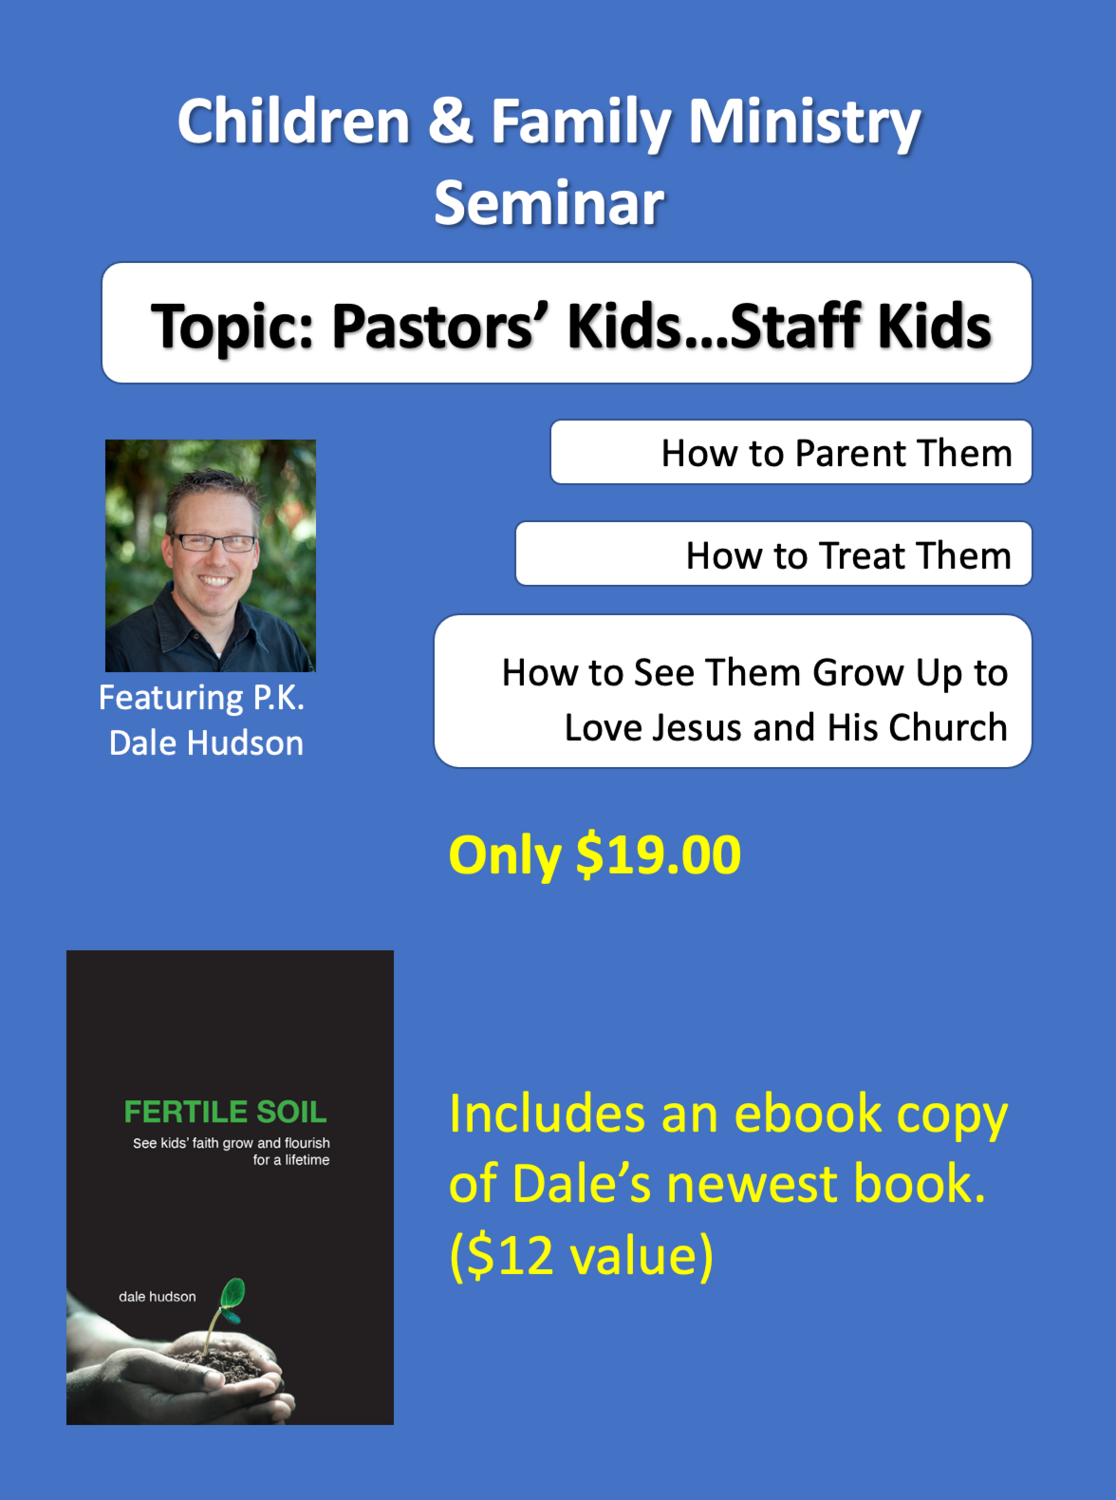 Pastors' Kids...Staff Kids - How to See Them Follow Jesus for a Lifetime (Seminar)